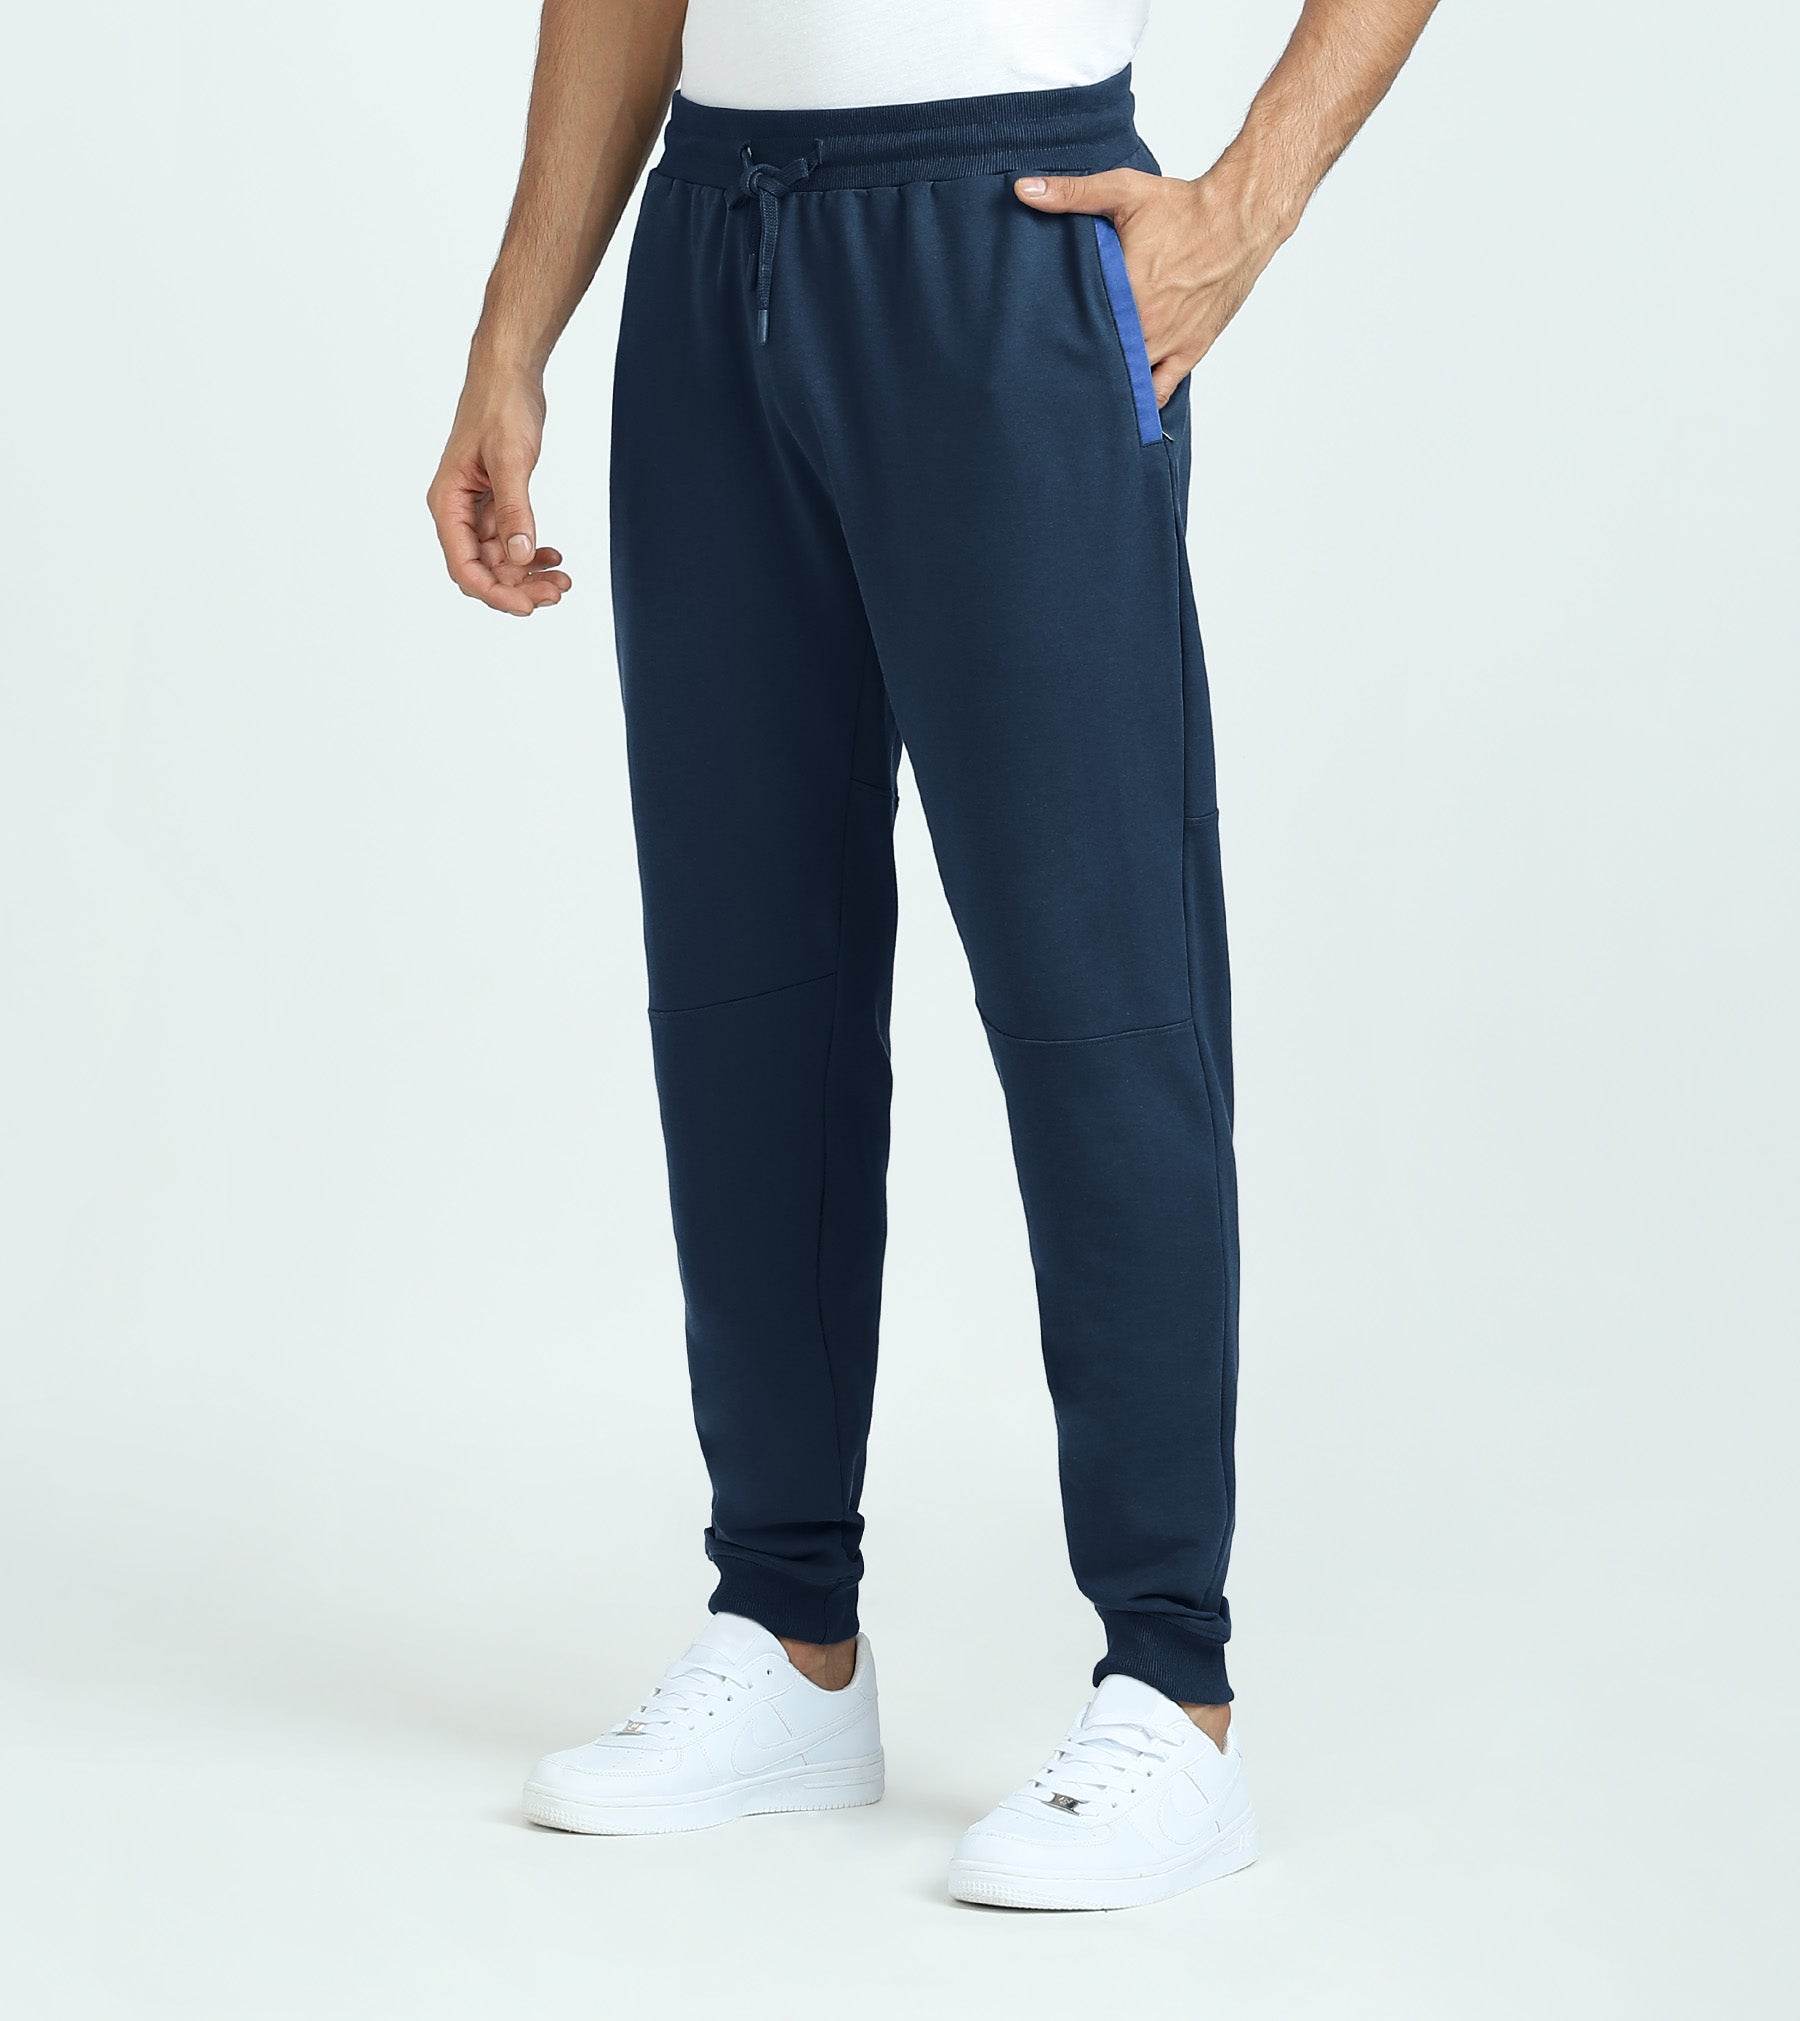 Quest French Terry Cotton-Blend Sweatshirt And Joggers Co-ord Set For Men - Atlas Blue - XYXX Mens Apparels